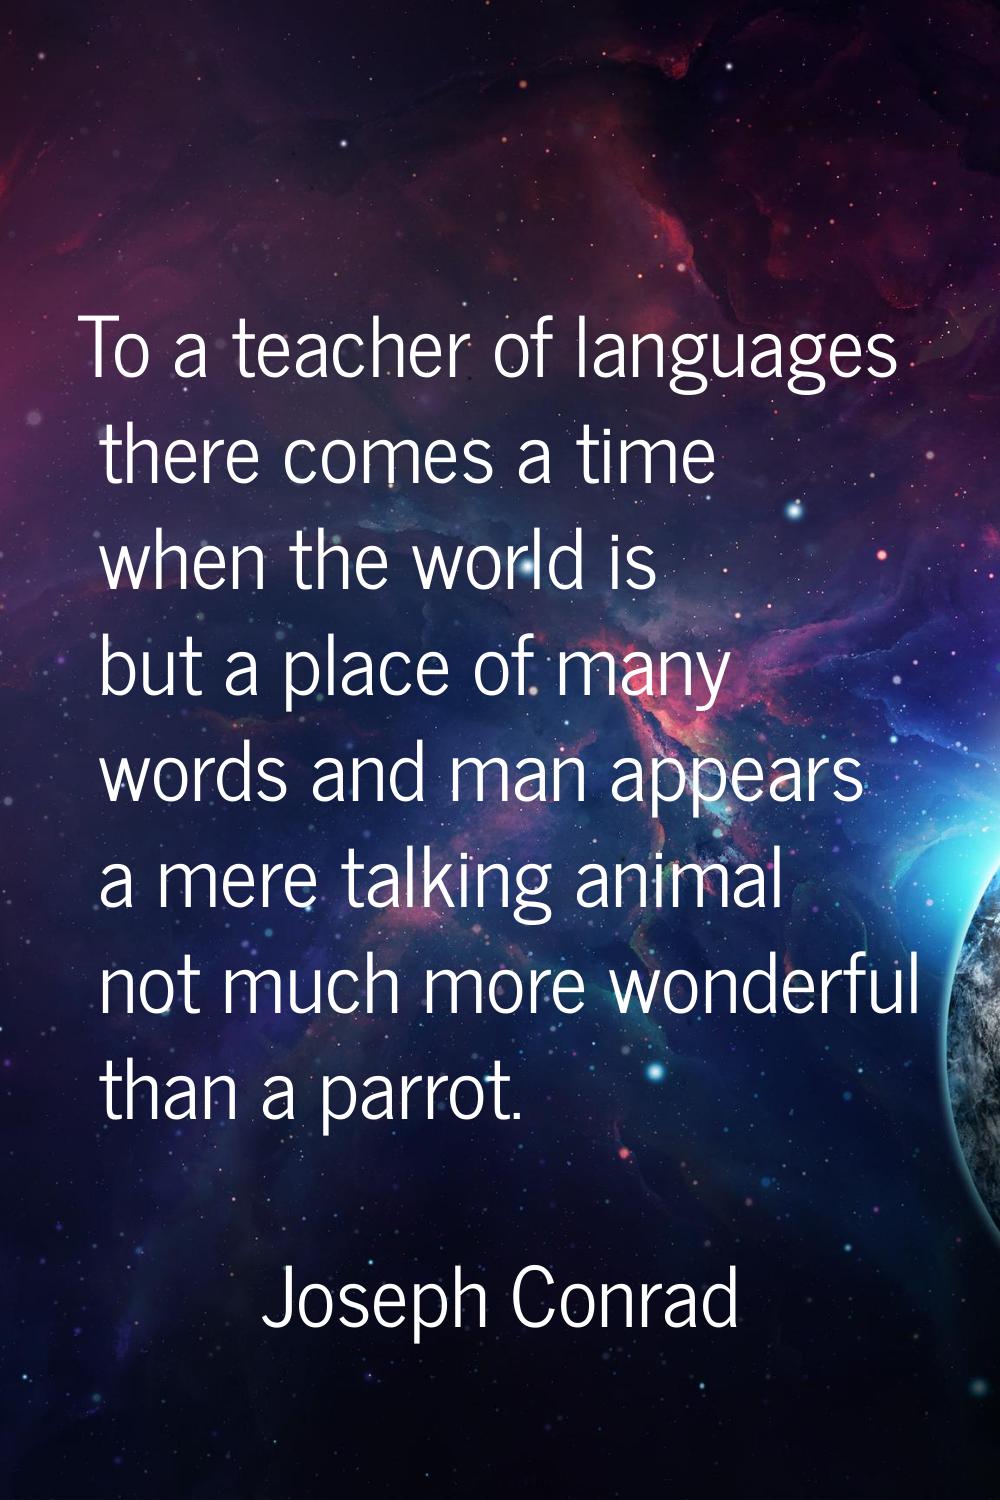 To a teacher of languages there comes a time when the world is but a place of many words and man ap